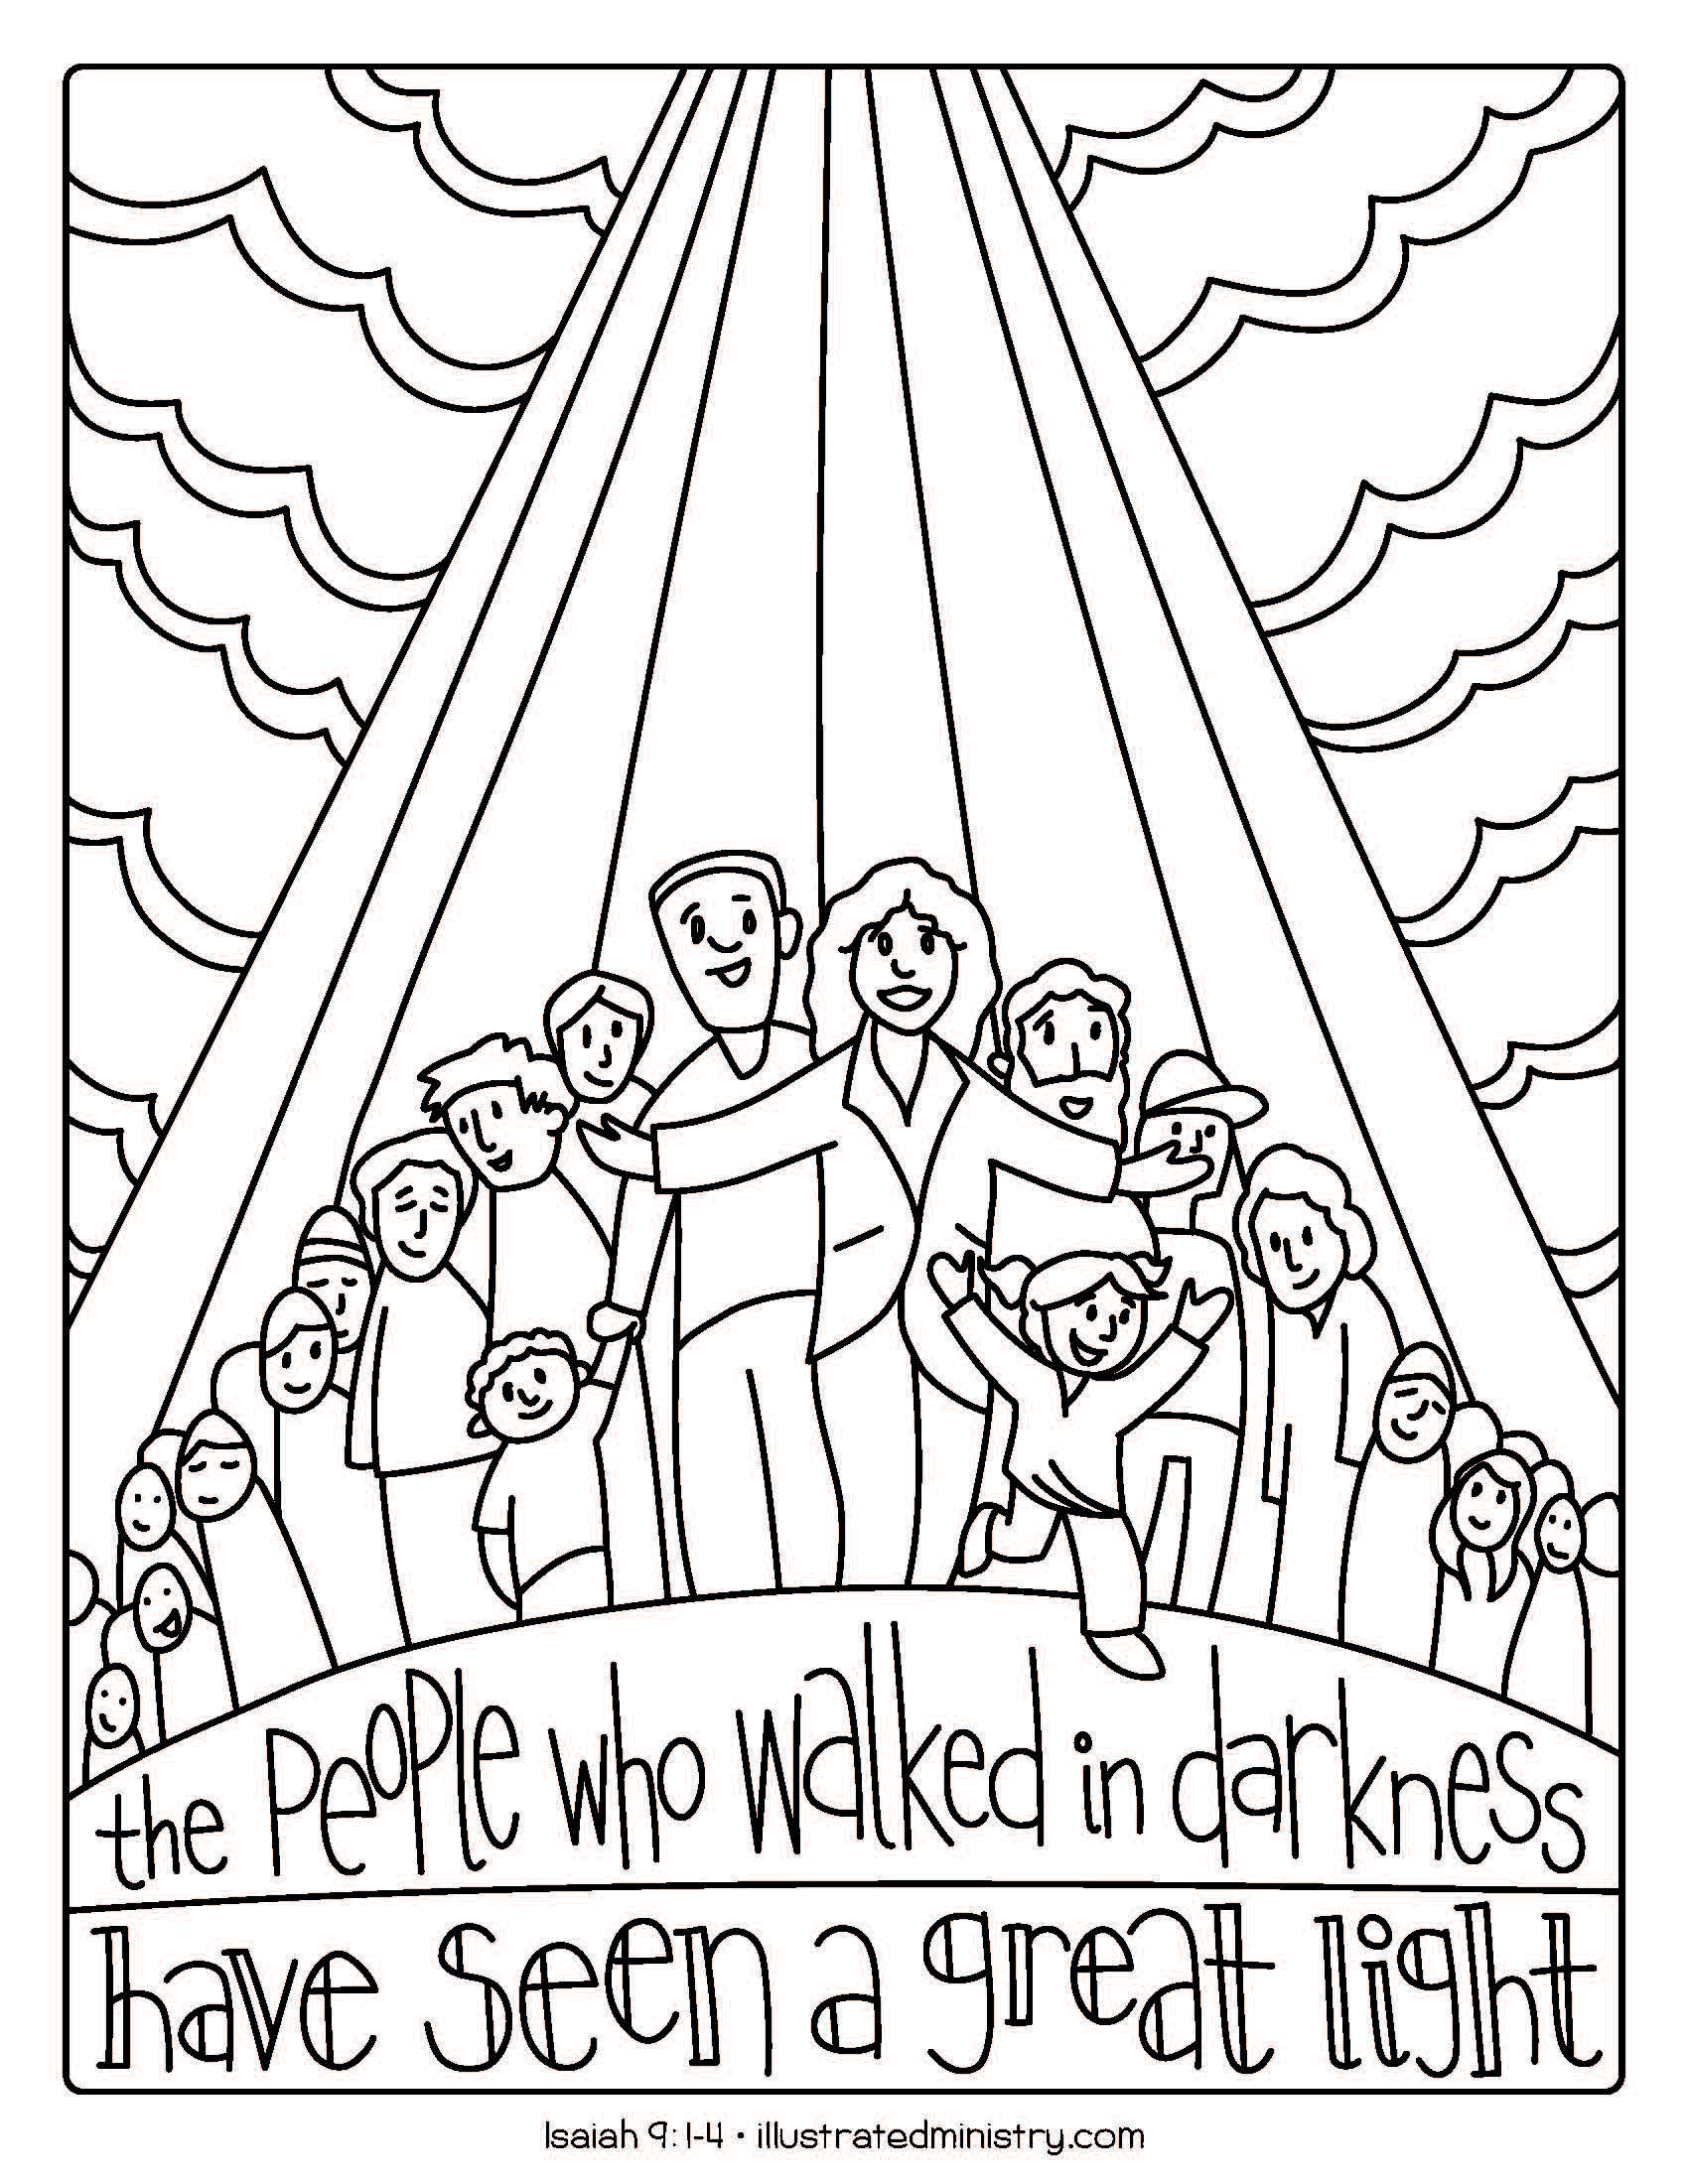 Download Bible Story Coloring Pages: Winter 2019-2020 - Illustrated Ministry